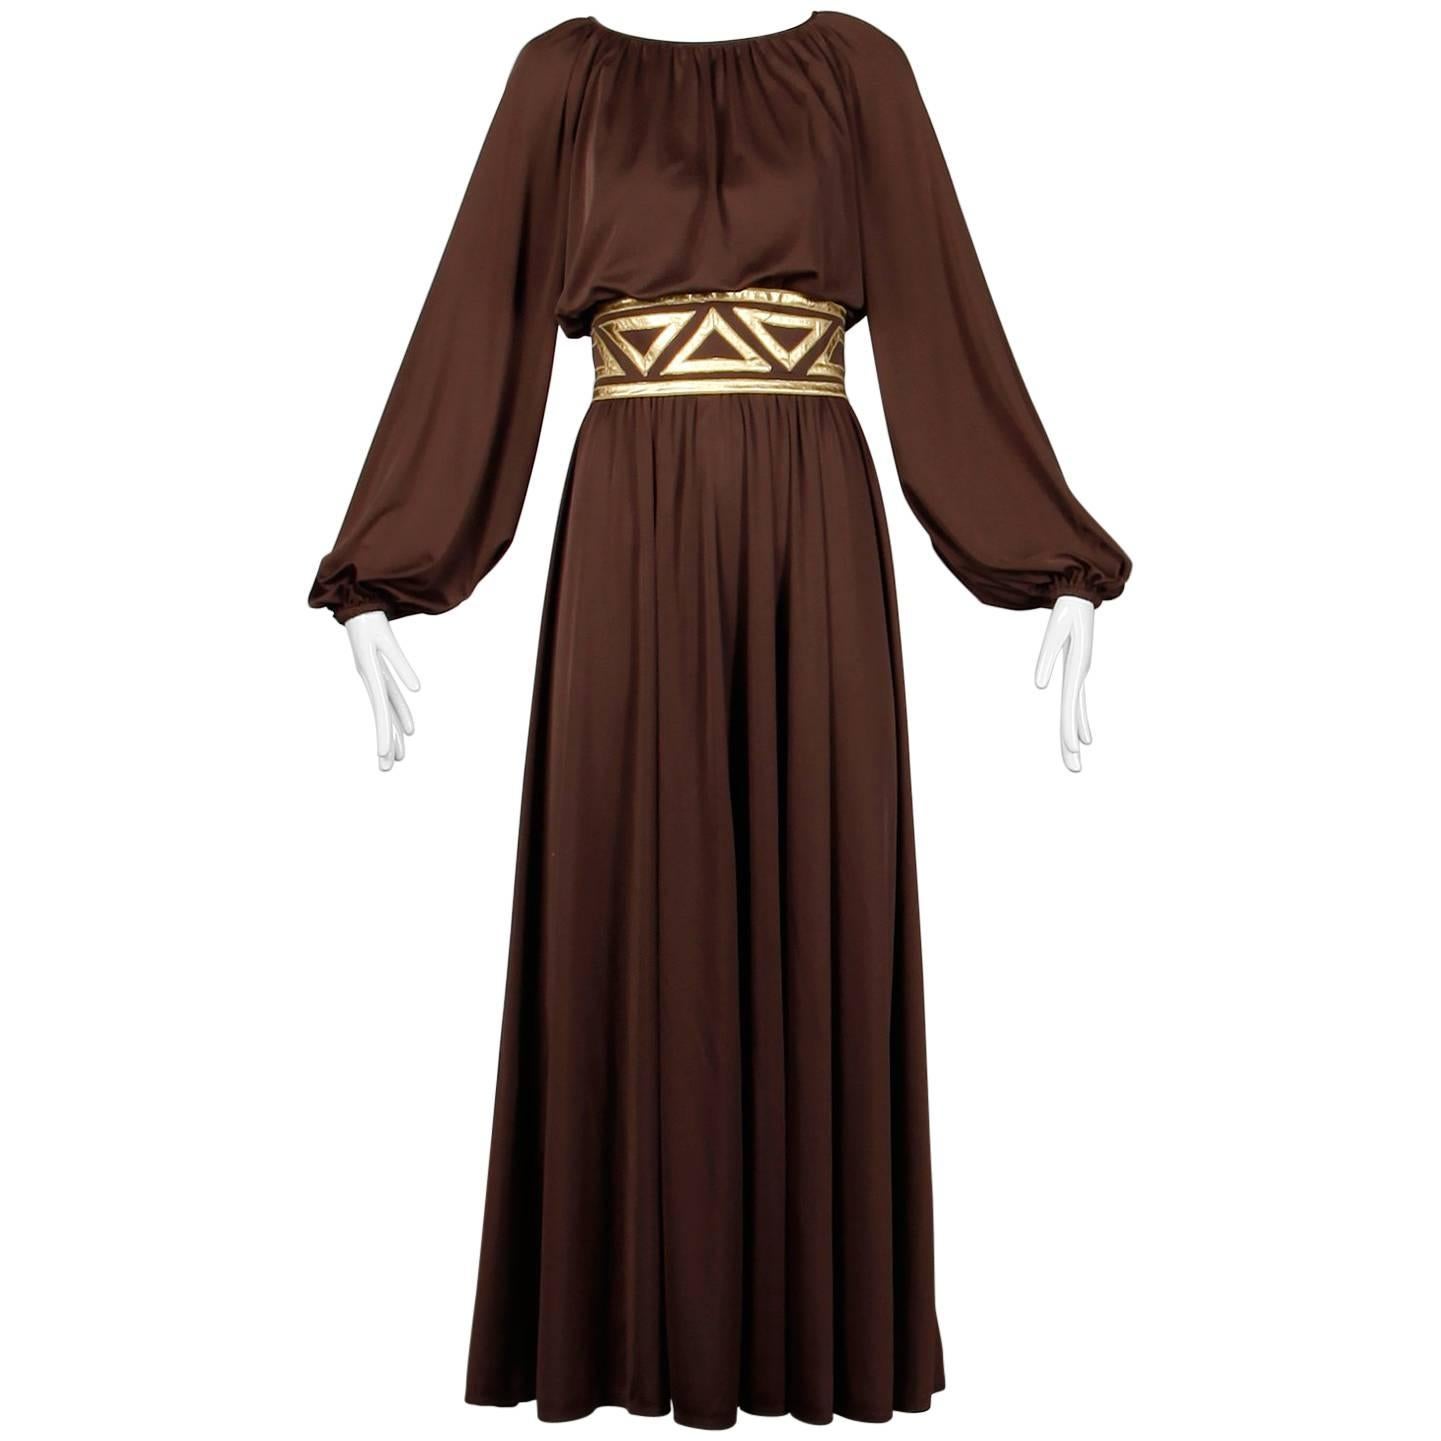 1970s Rizkallah for Don Friese Ltd. Brown Grecian Jersey Knit Maxi Dress or Gown